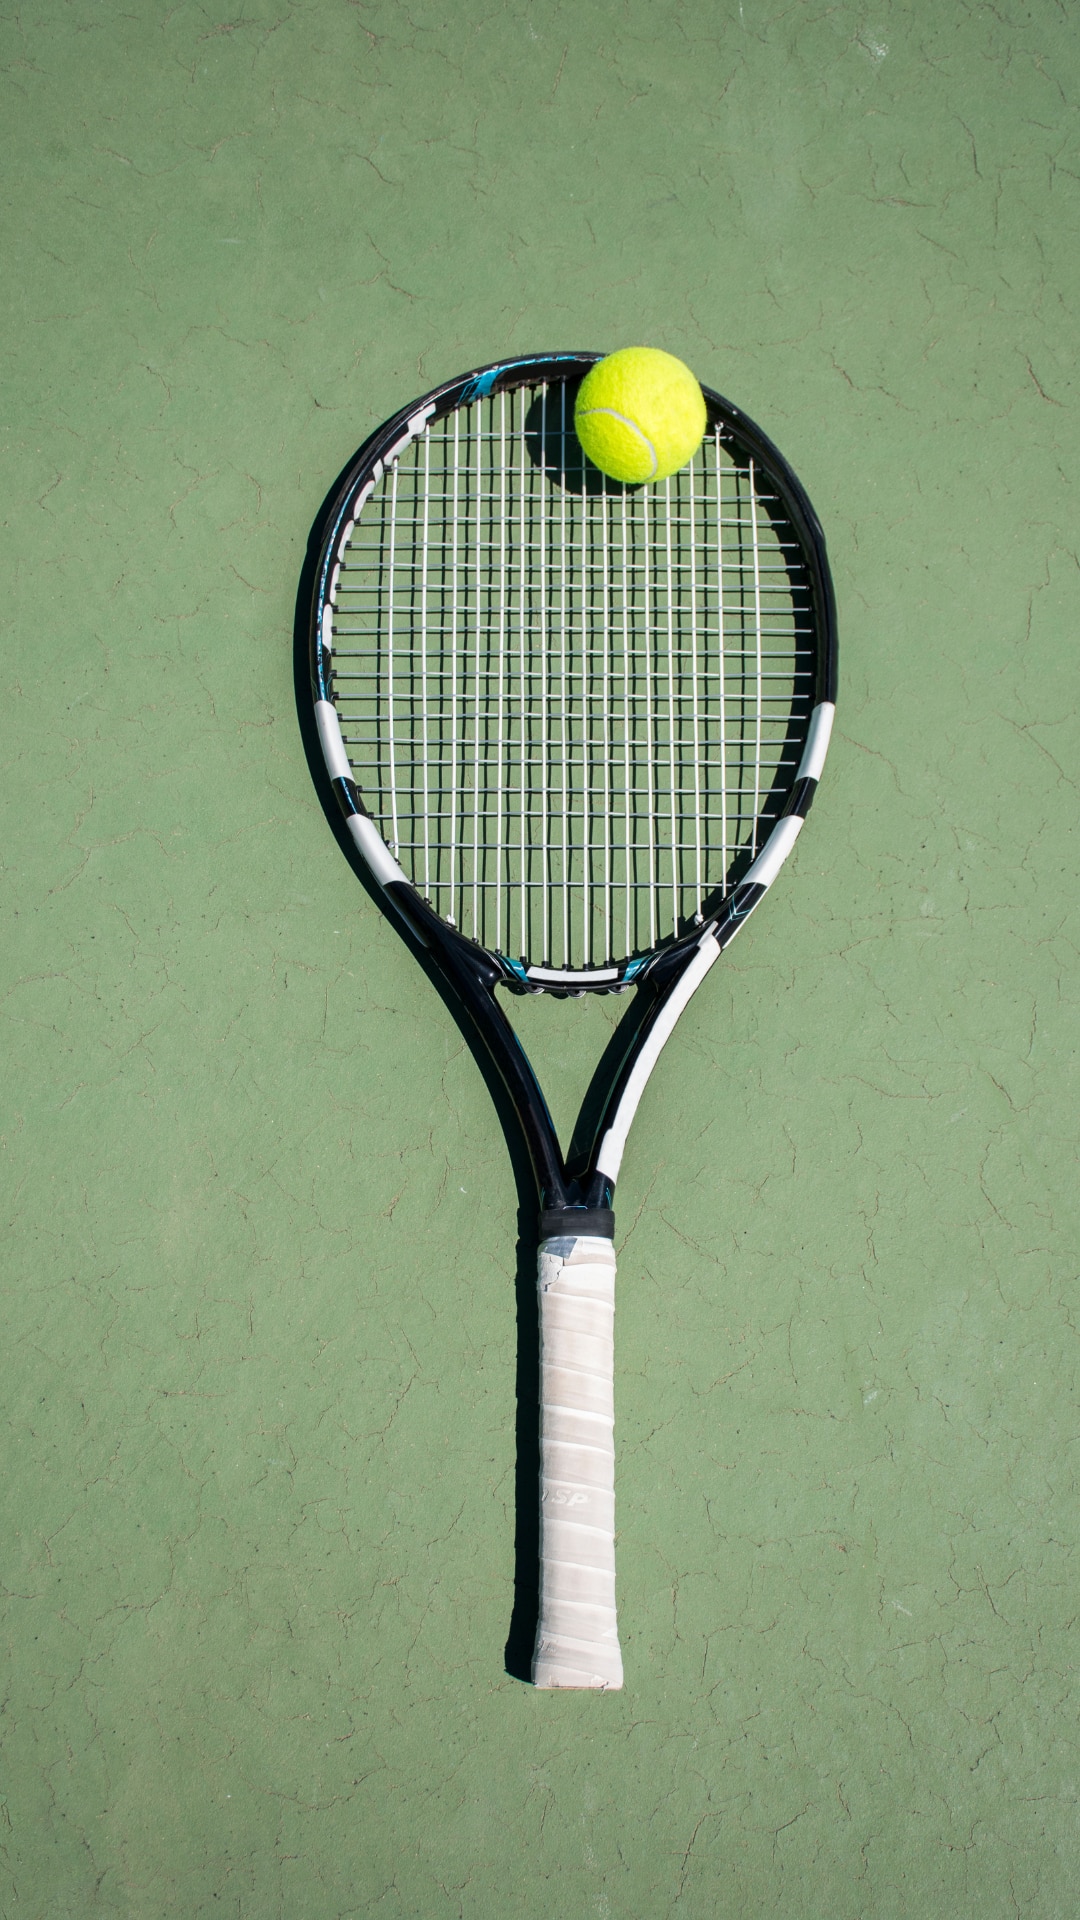 Body Parts That Are Frequently Affected While Playing Tennis